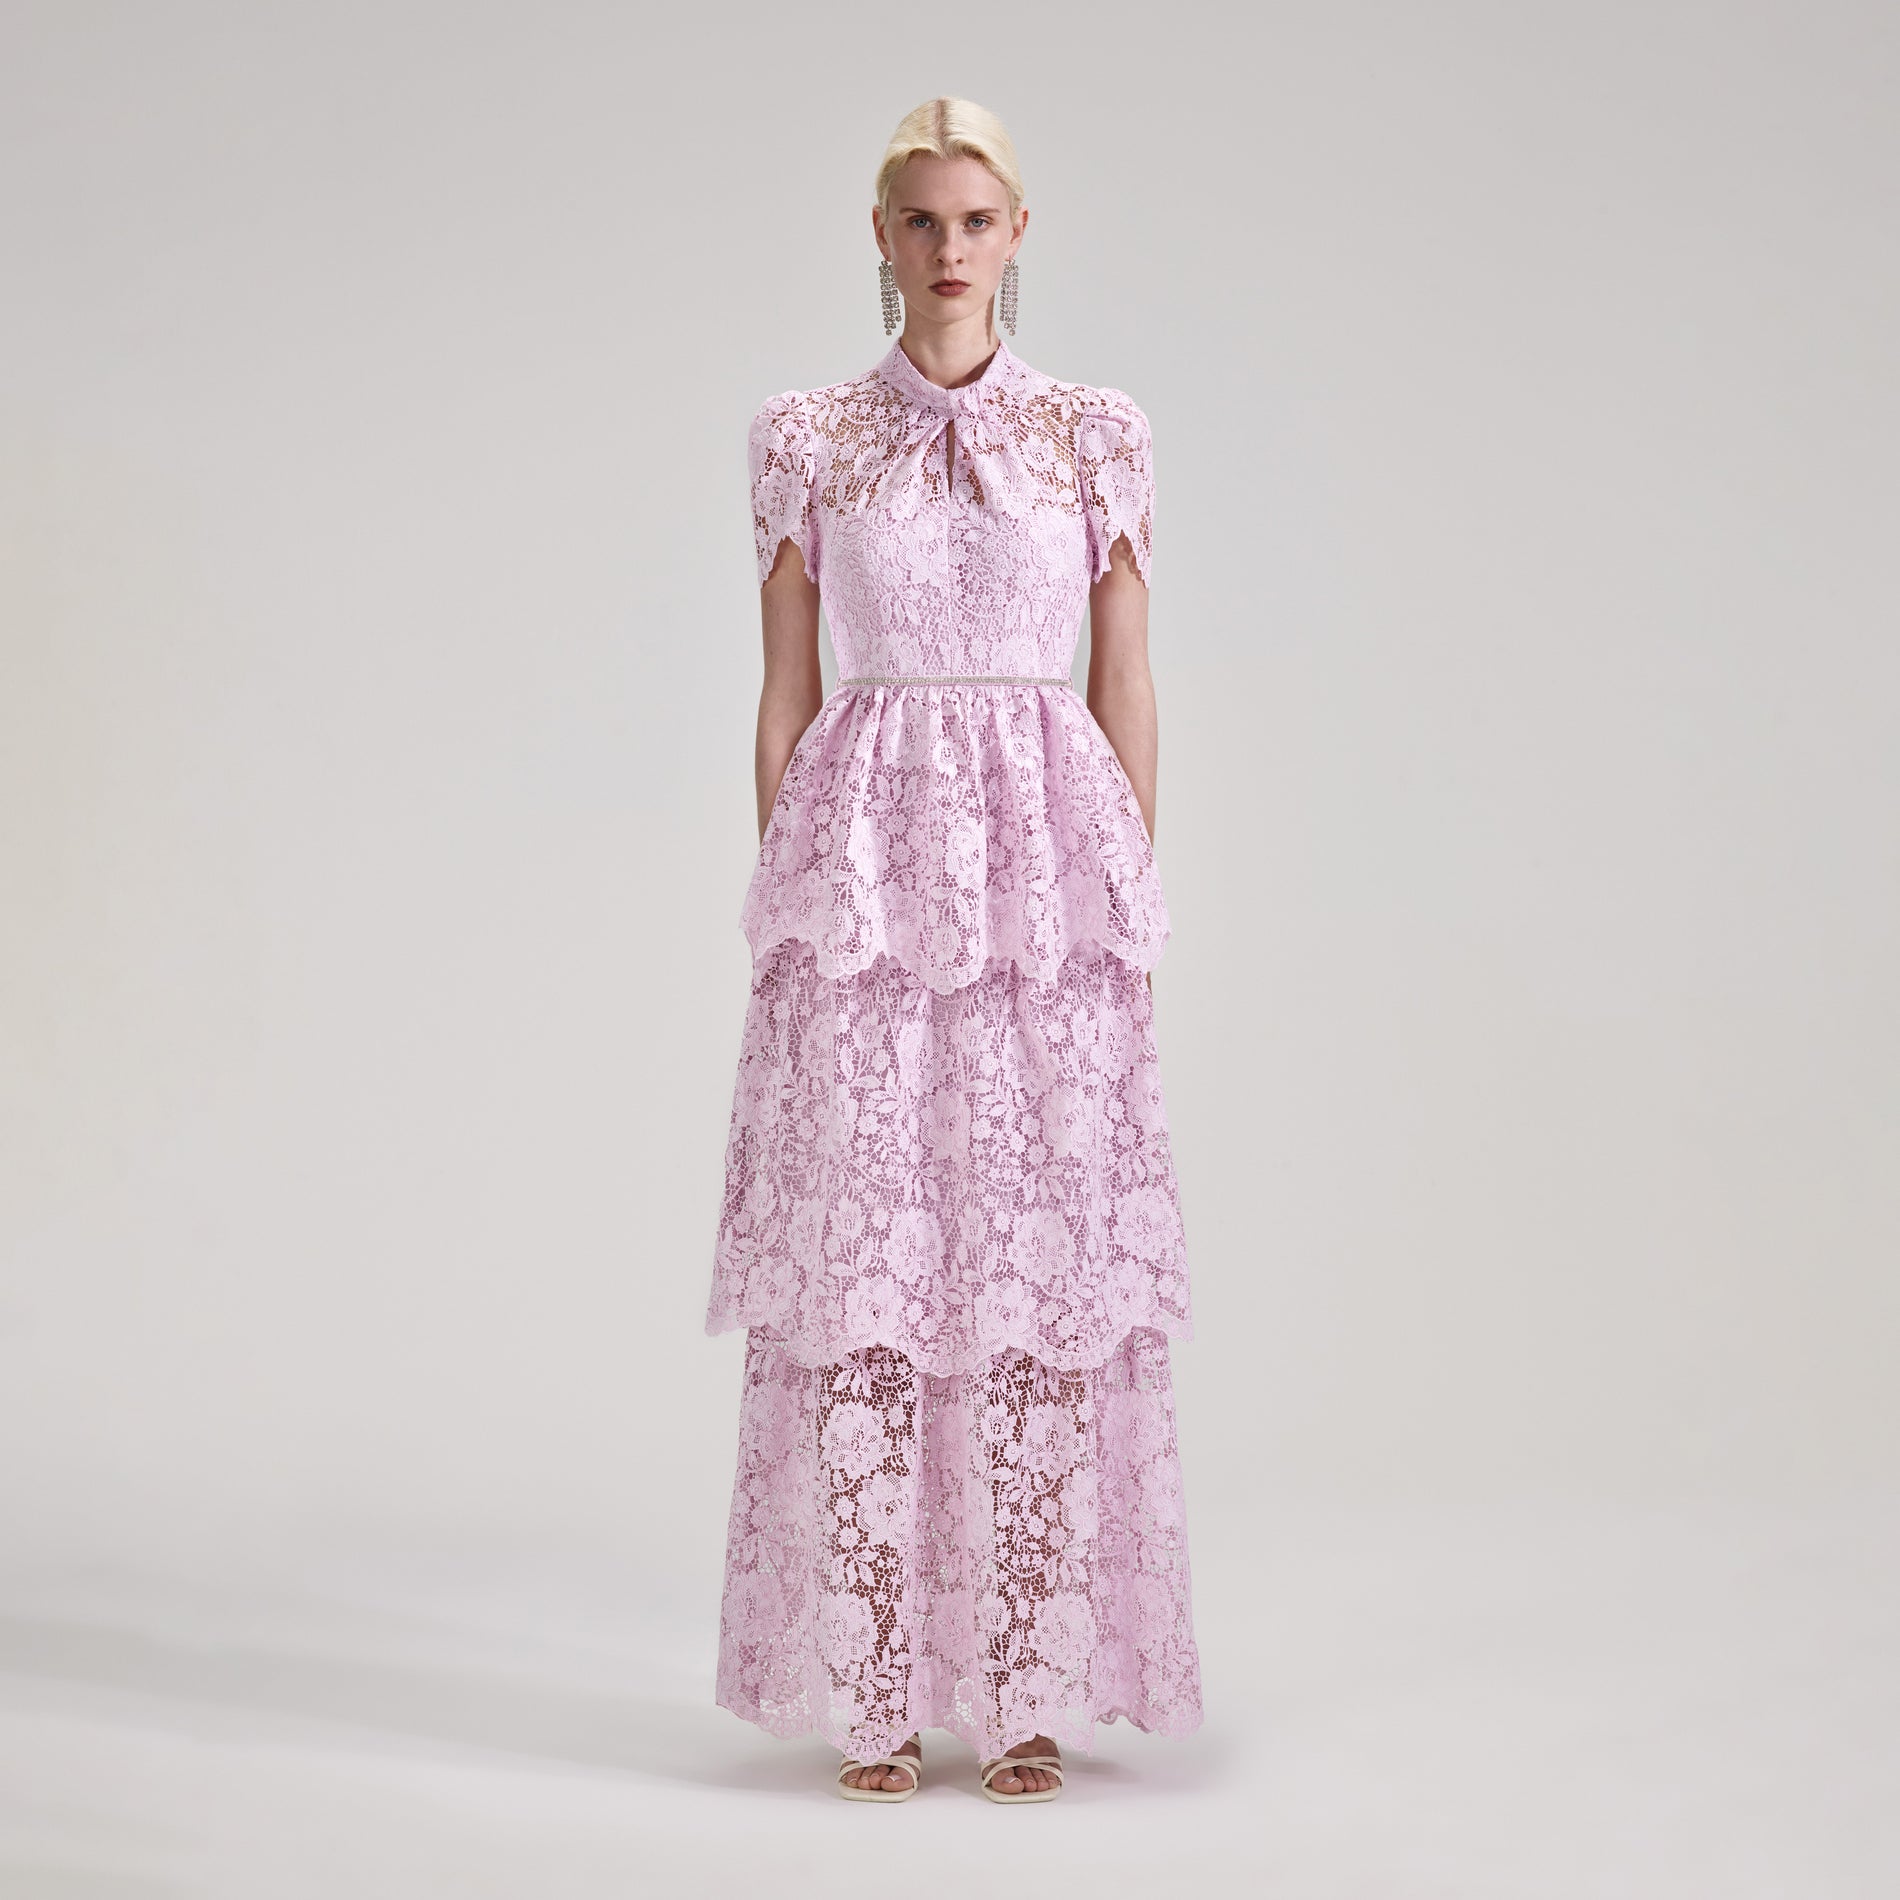 A woman wearing the Pink Cord Lace Tiered Maxi Dress